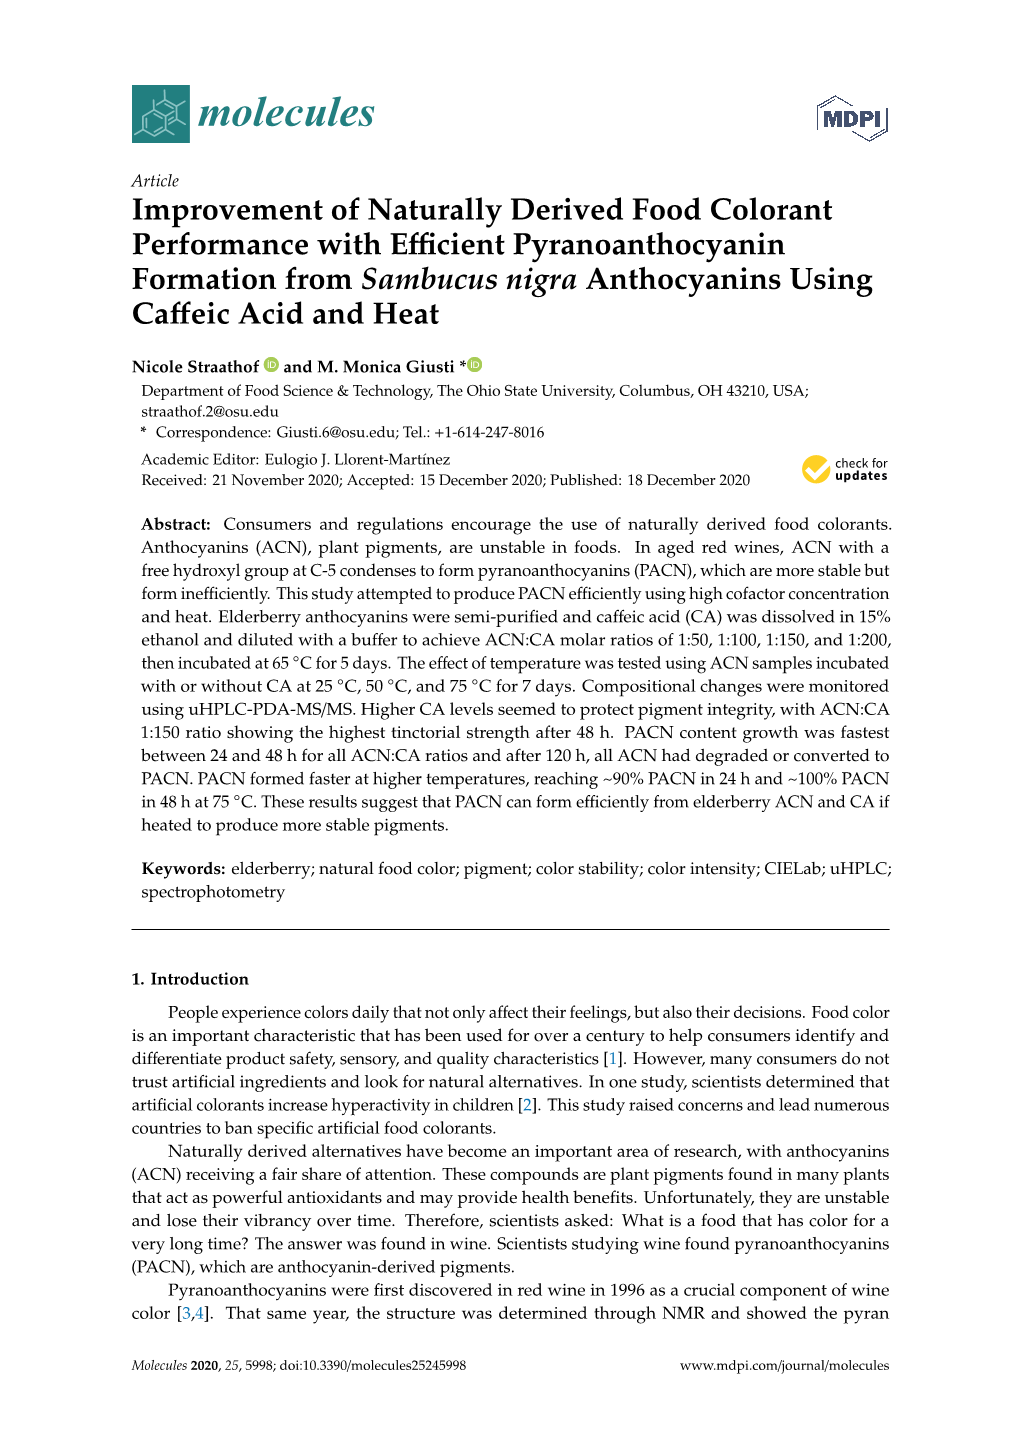 Improvement of Naturally Derived Food Colorant Performance with Eﬃcient Pyranoanthocyanin Formation from Sambucus Nigra Anthocyanins Using Caﬀeic Acid and Heat